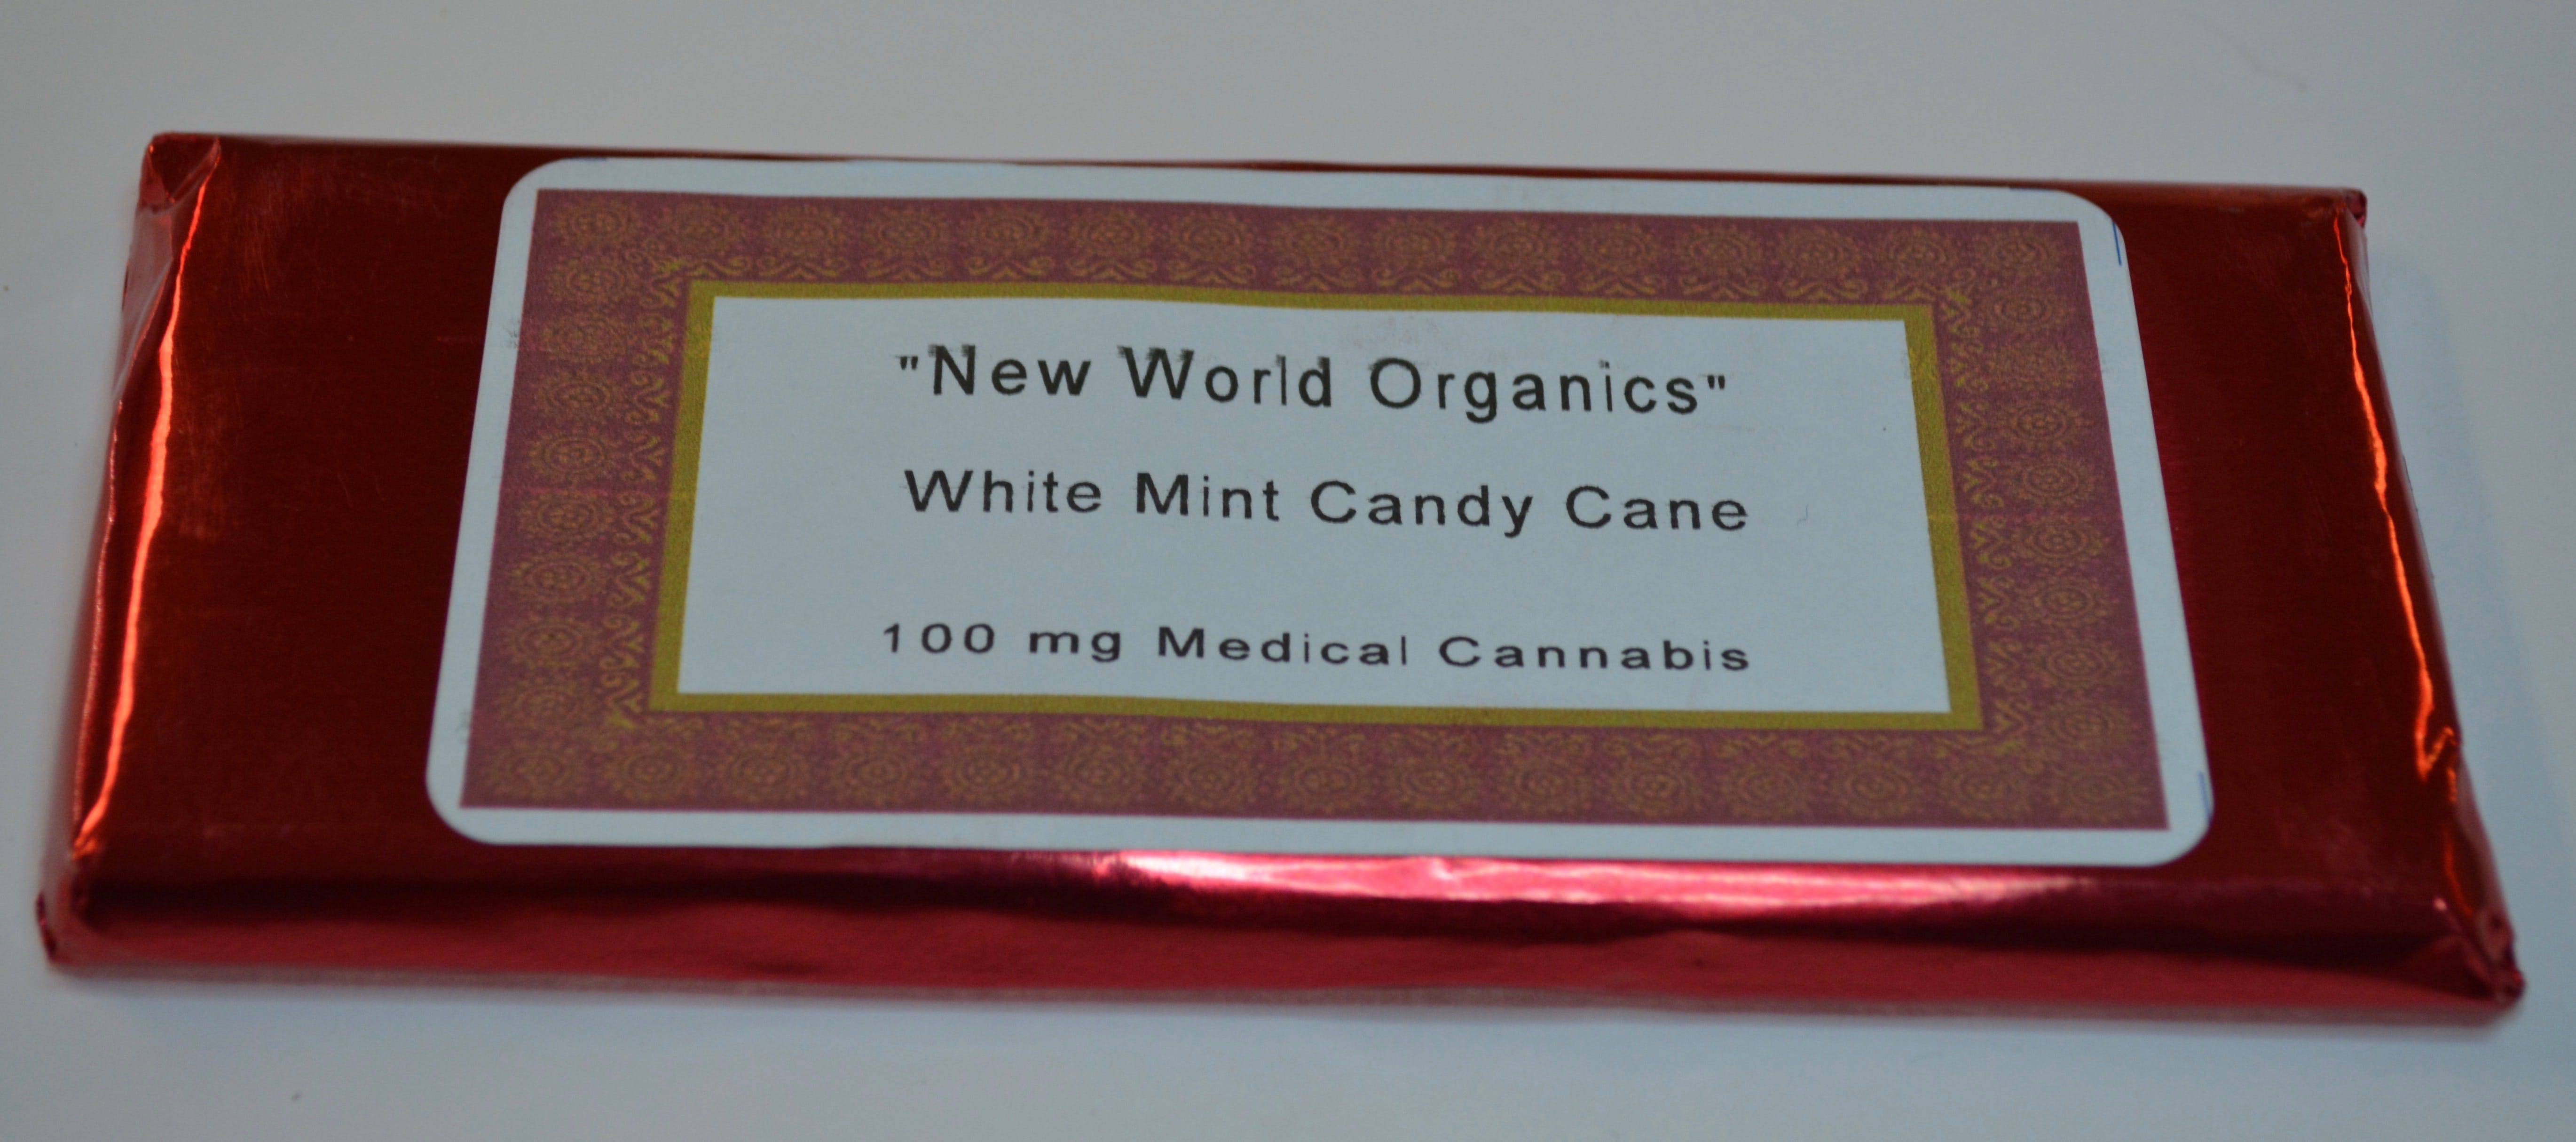 edible-nwo-white-chocolate-with-candy-cane